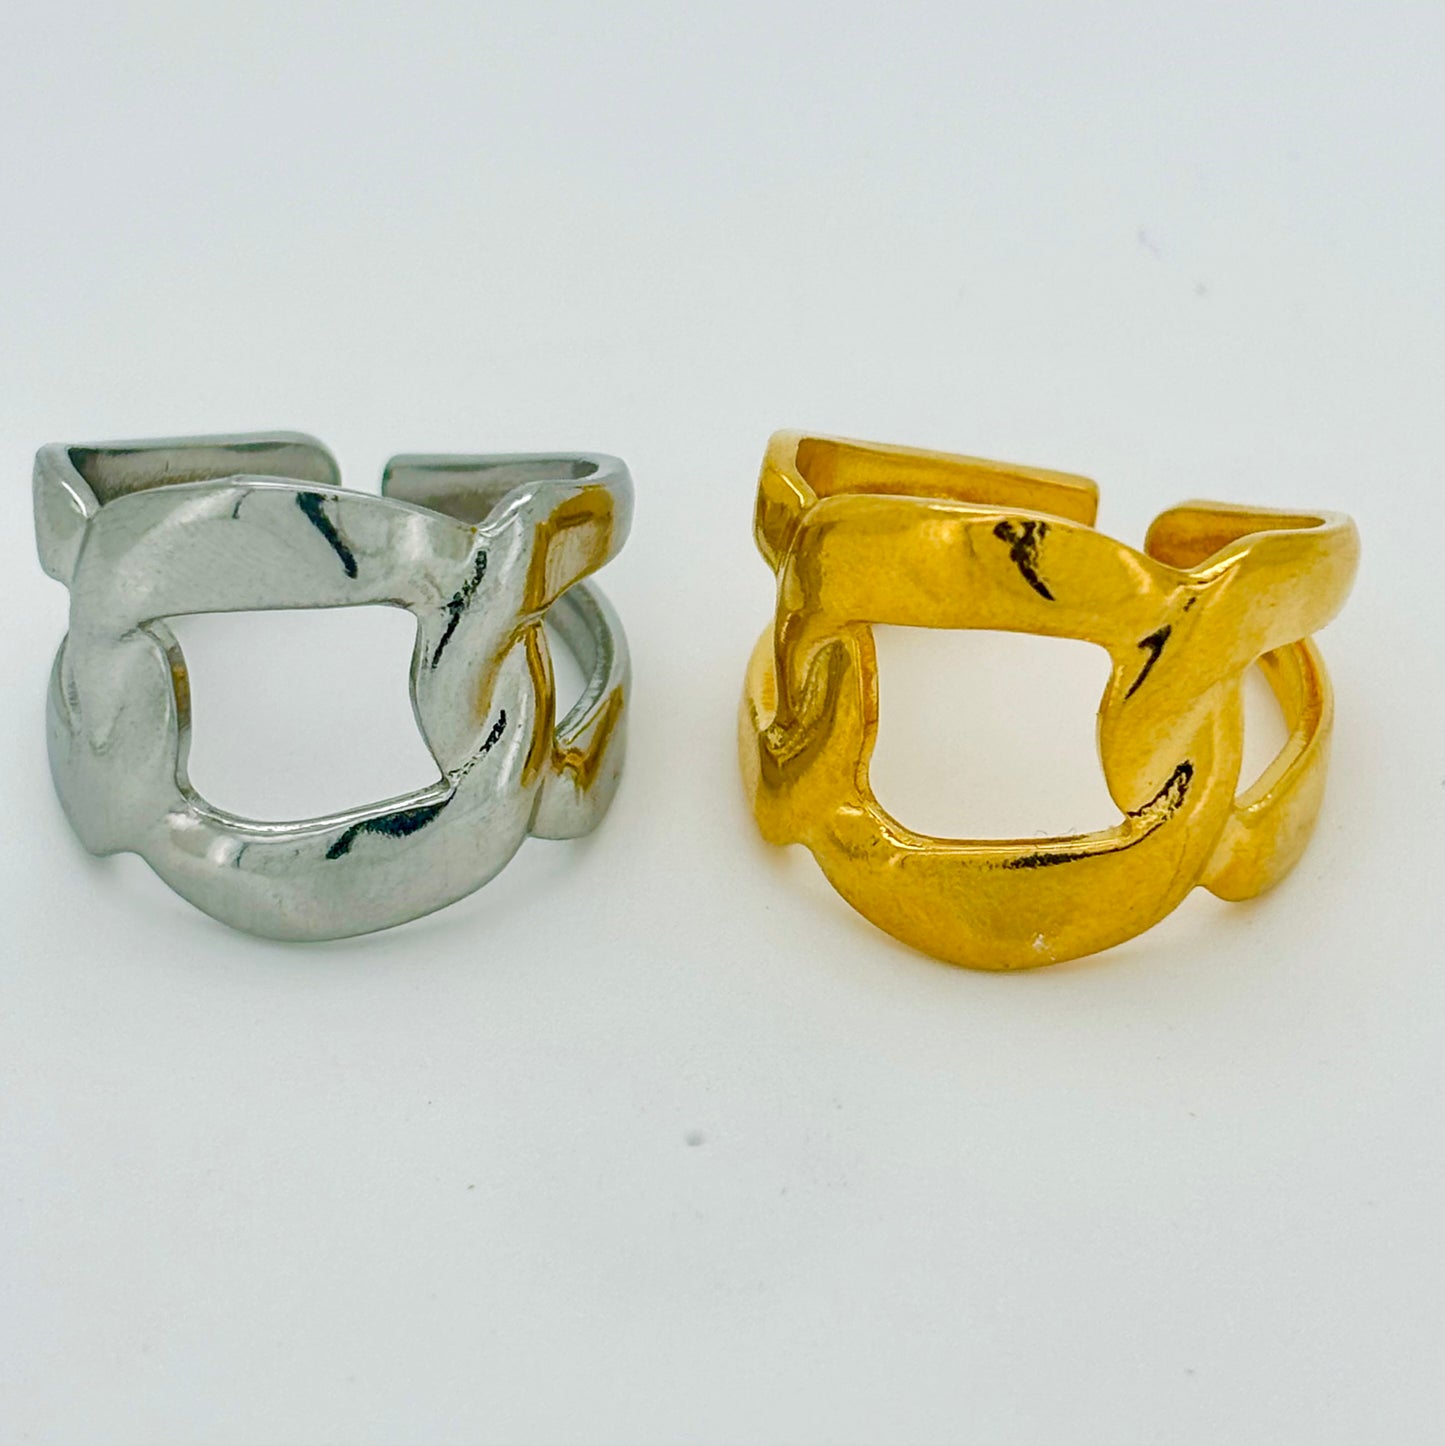 Chunky chain ring adjustable in stainless steel silver or gold tone R12